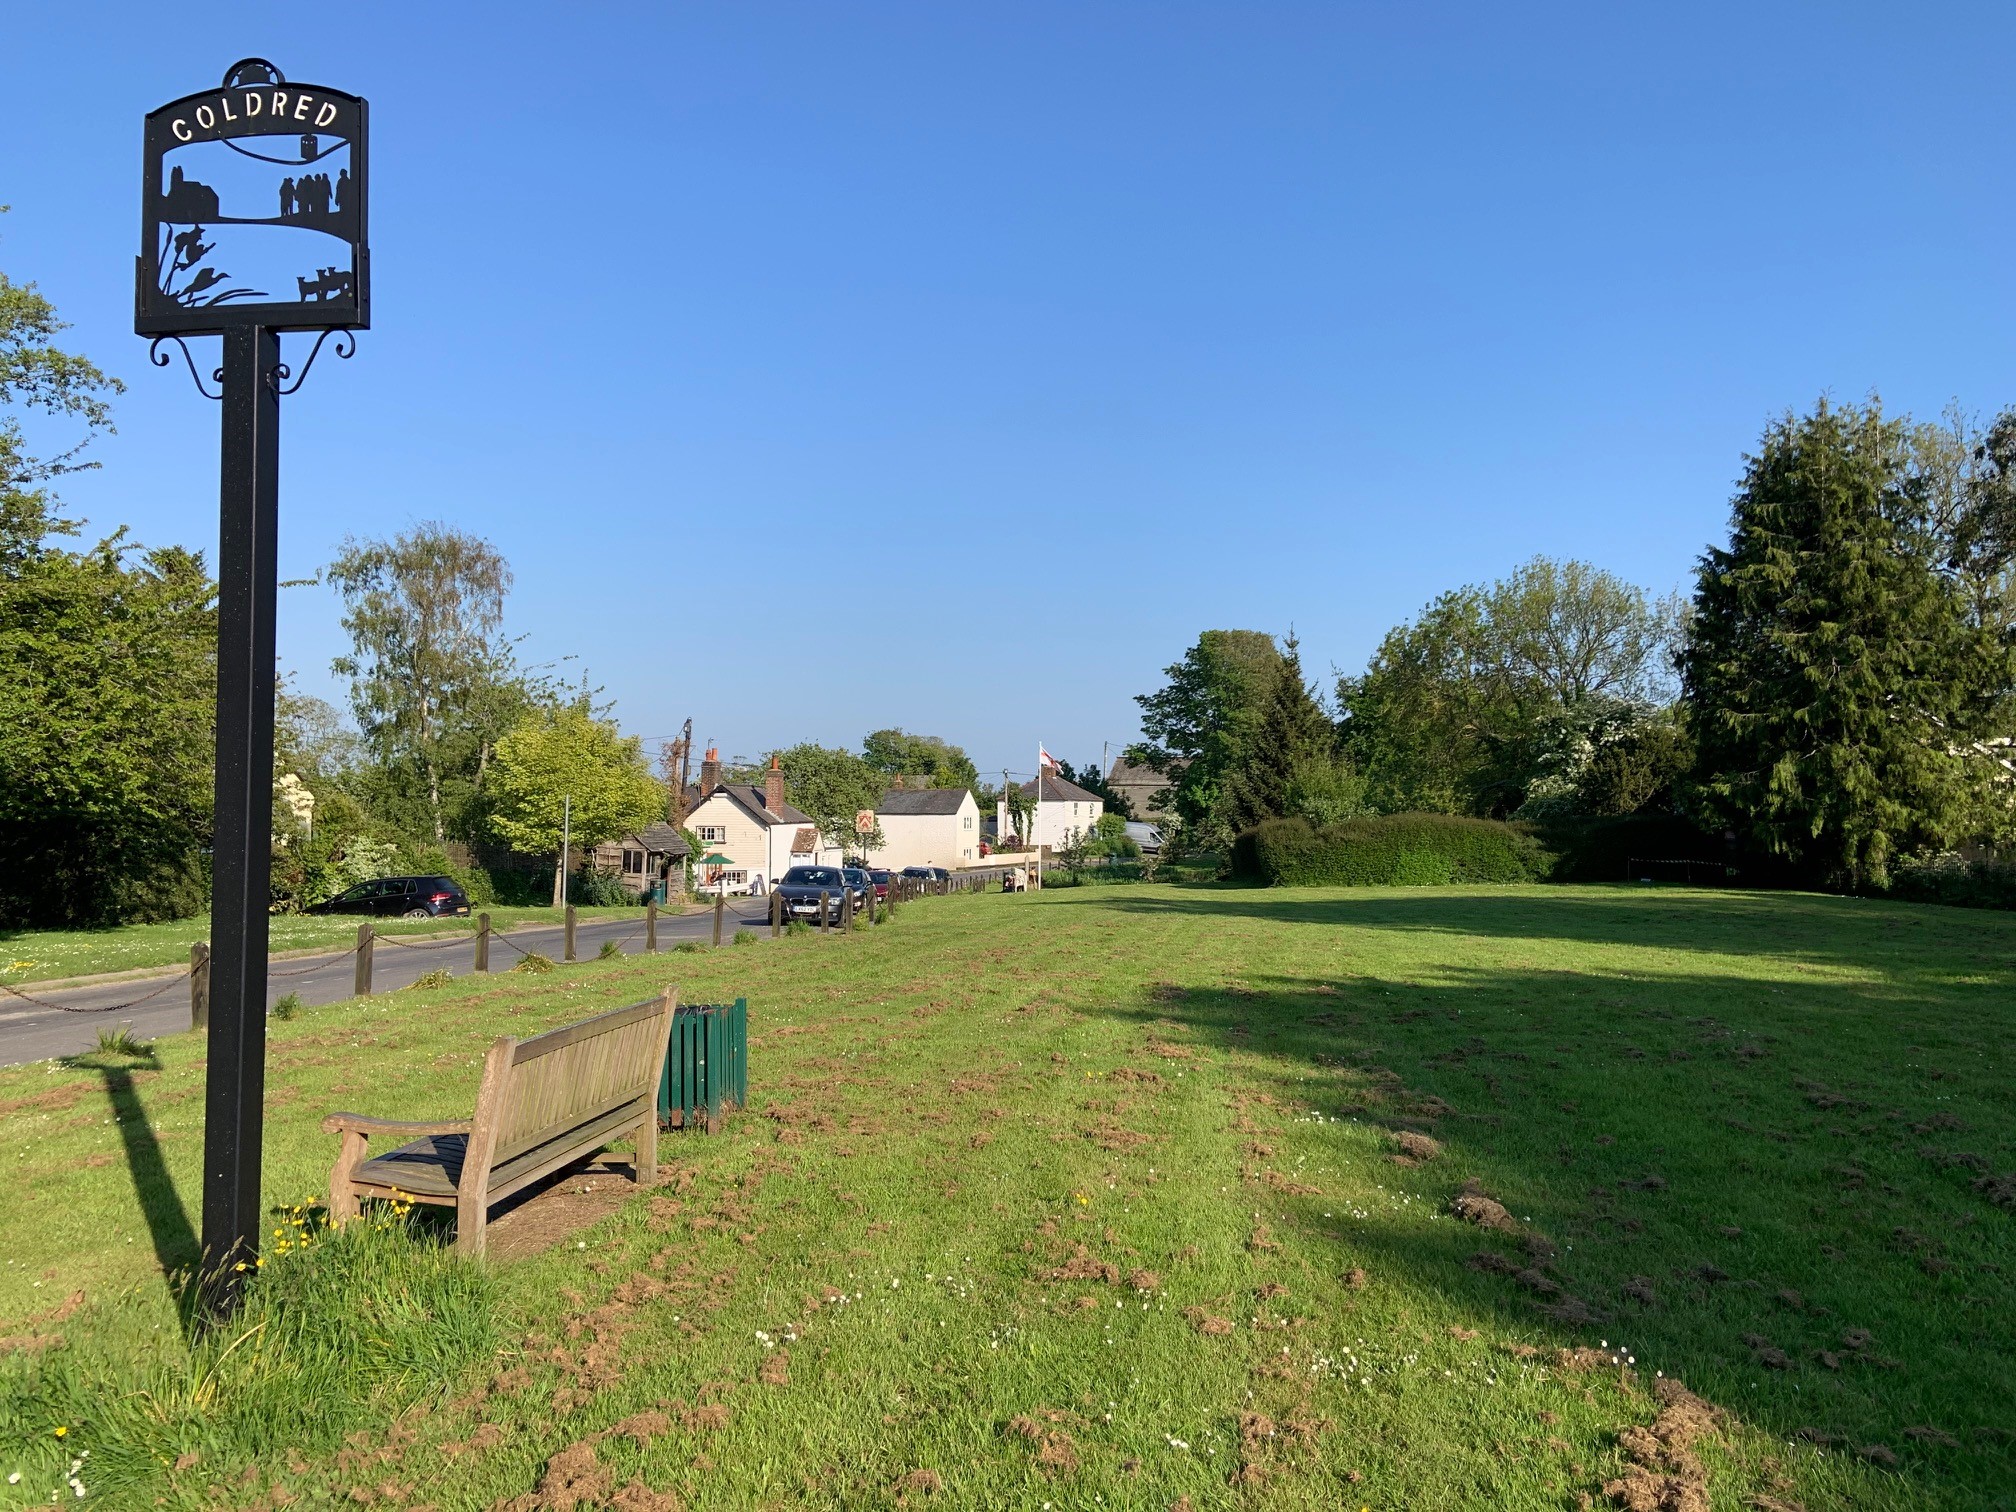 Coldred Village Green and Sign